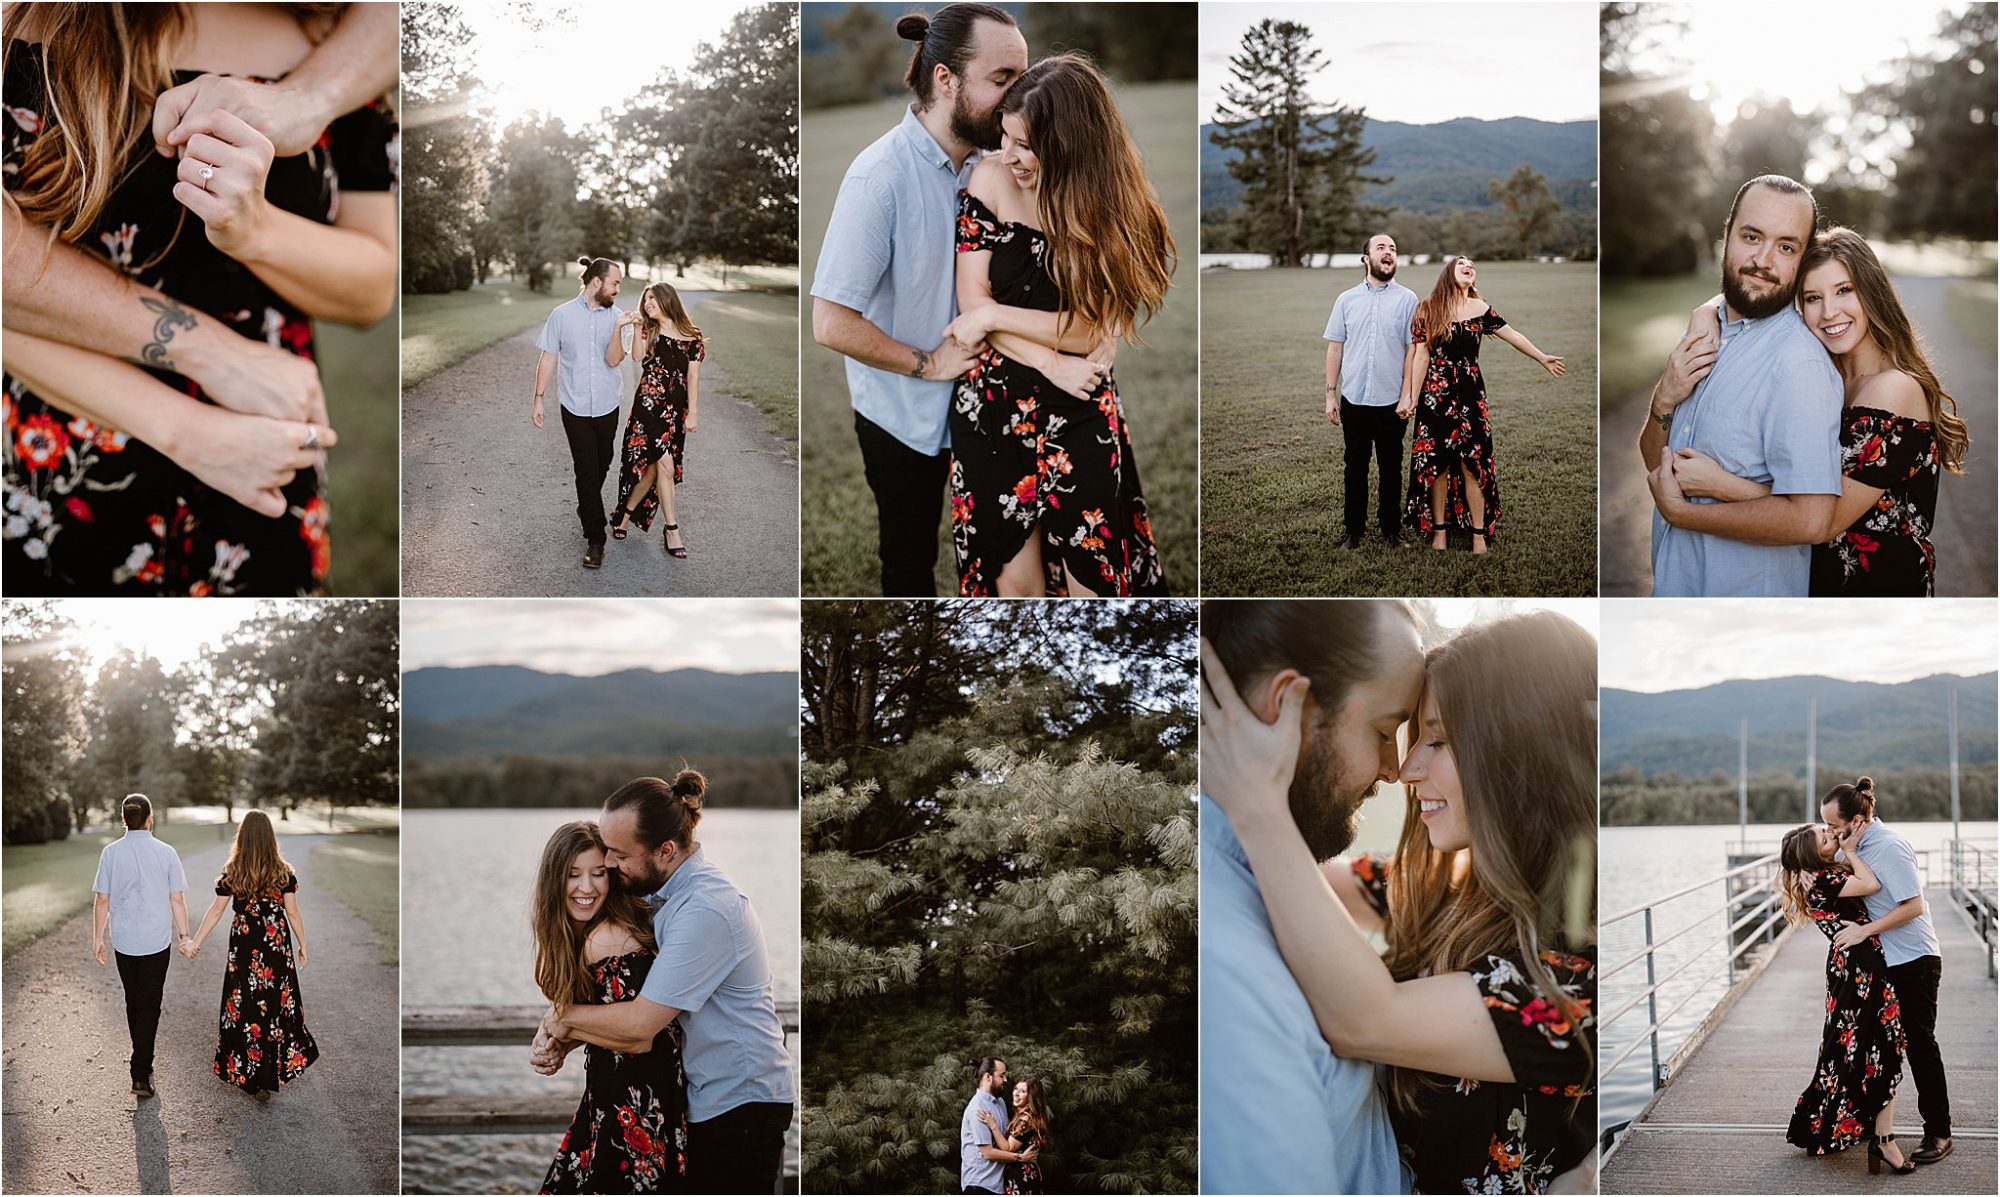 Cove Lake State Park Engagement Photos